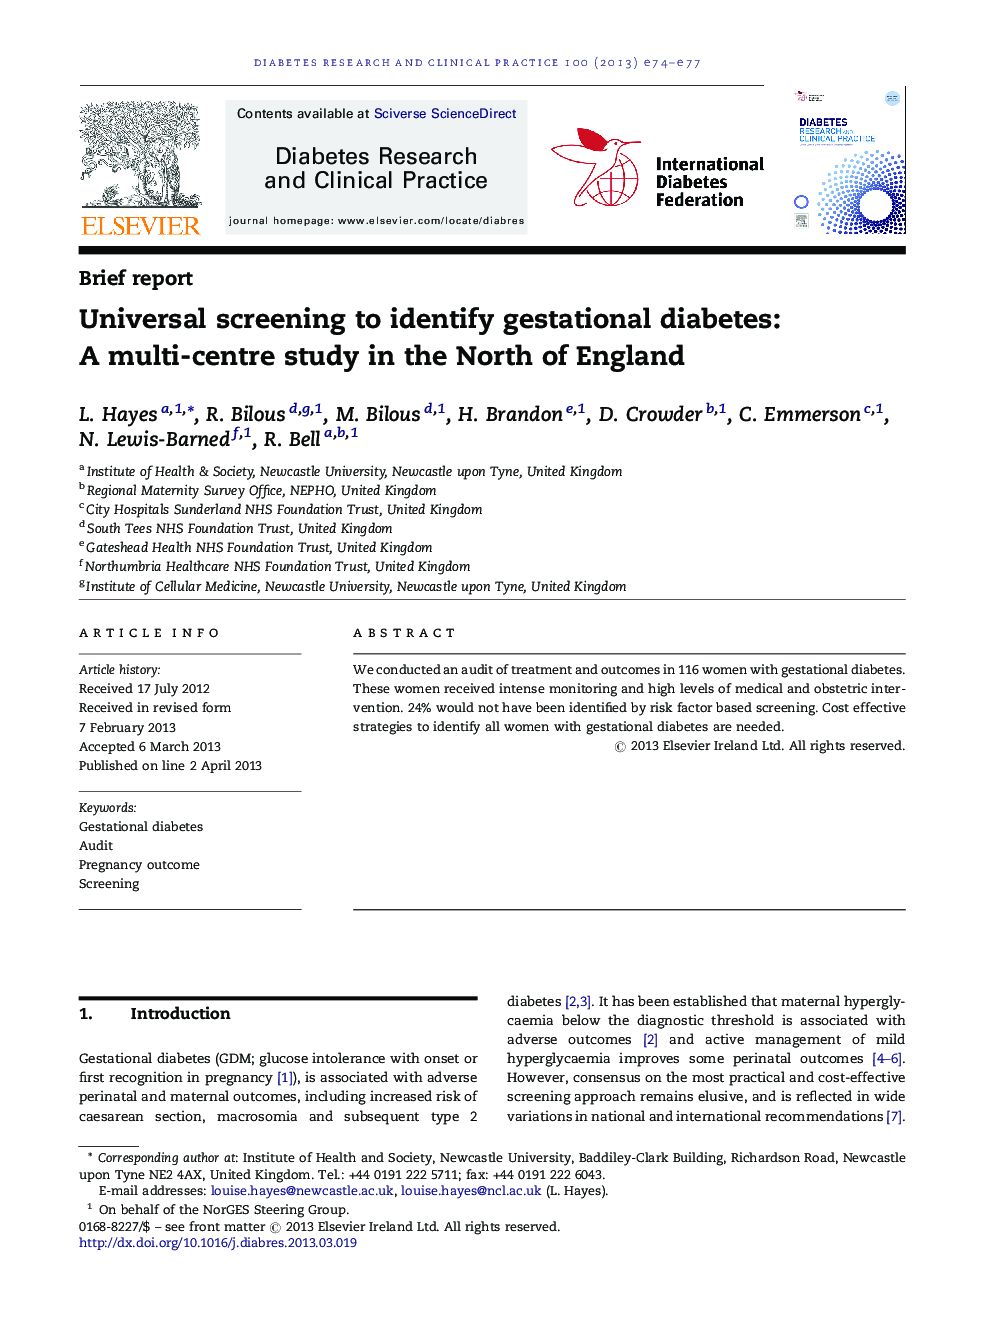 Universal screening to identify gestational diabetes: A multi-centre study in the North of England